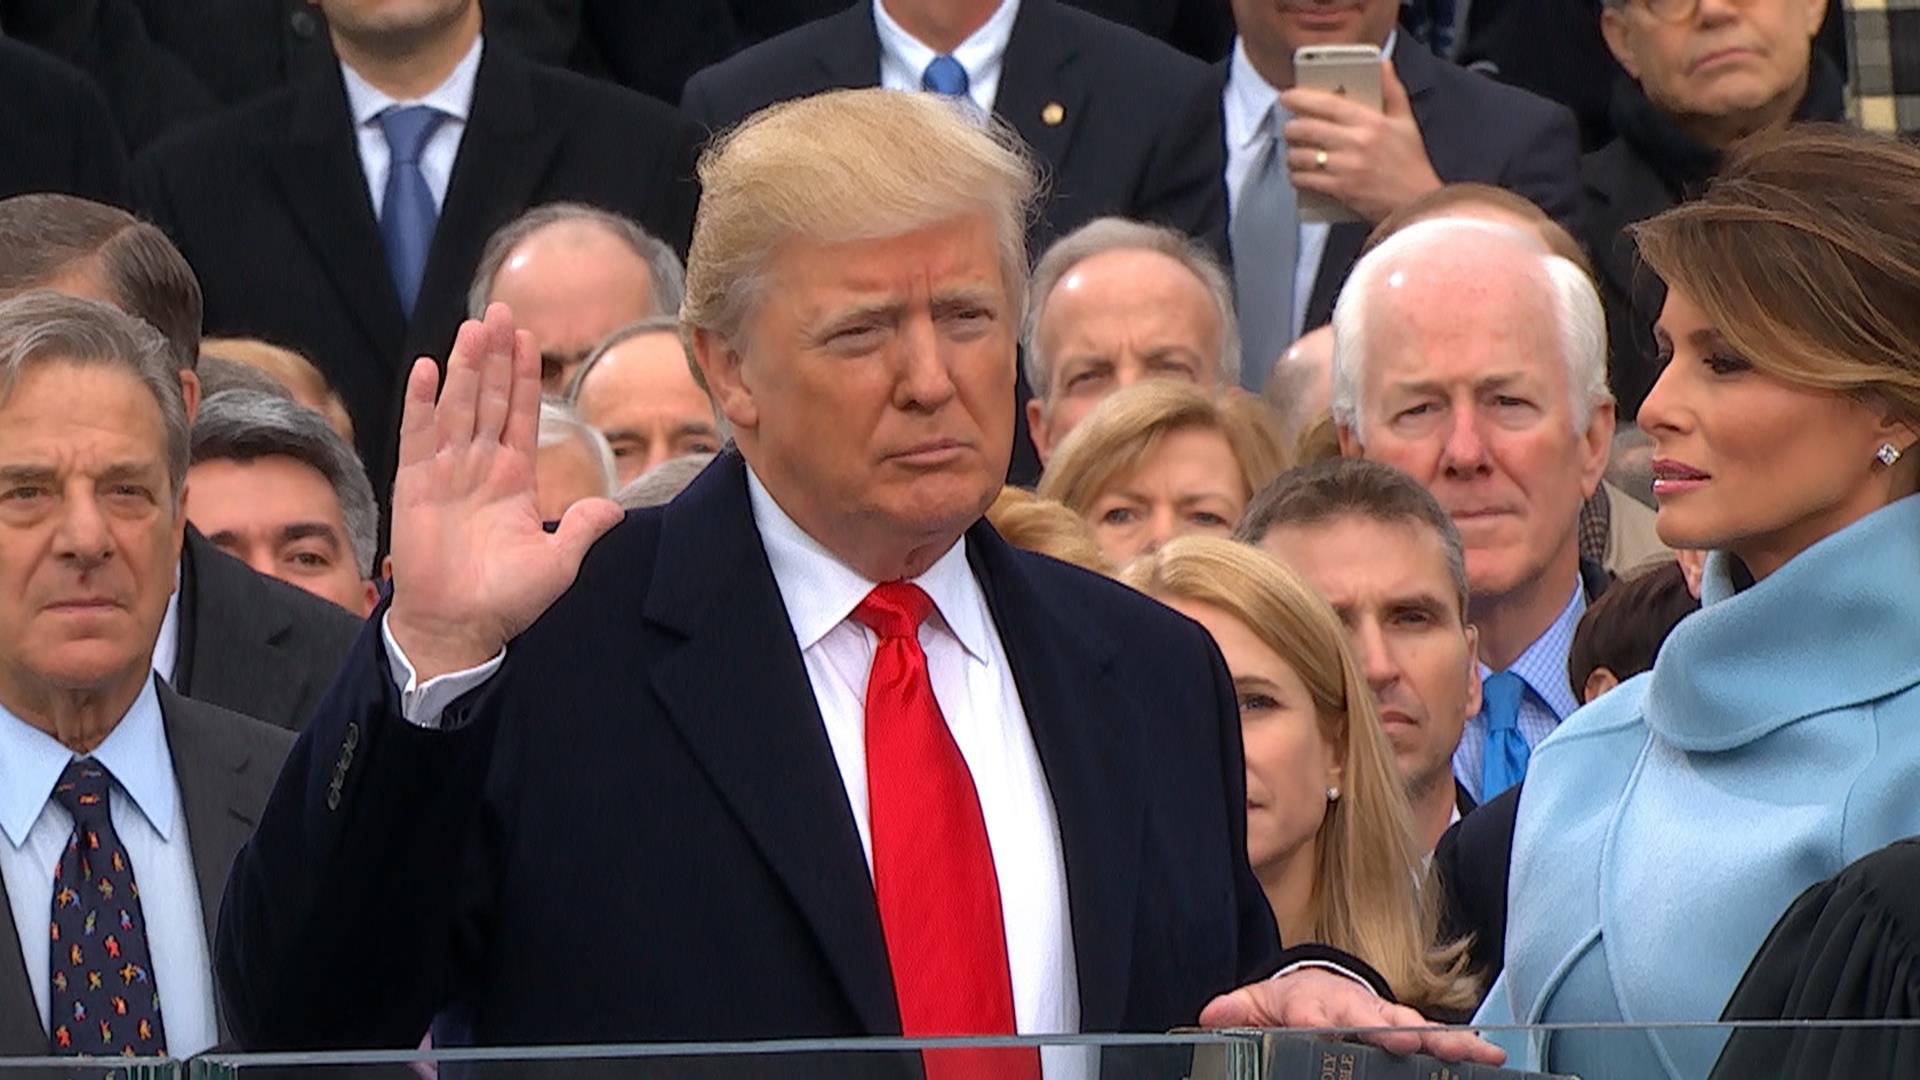 Watch Donald Trump Take The Presidential Oath Of Office